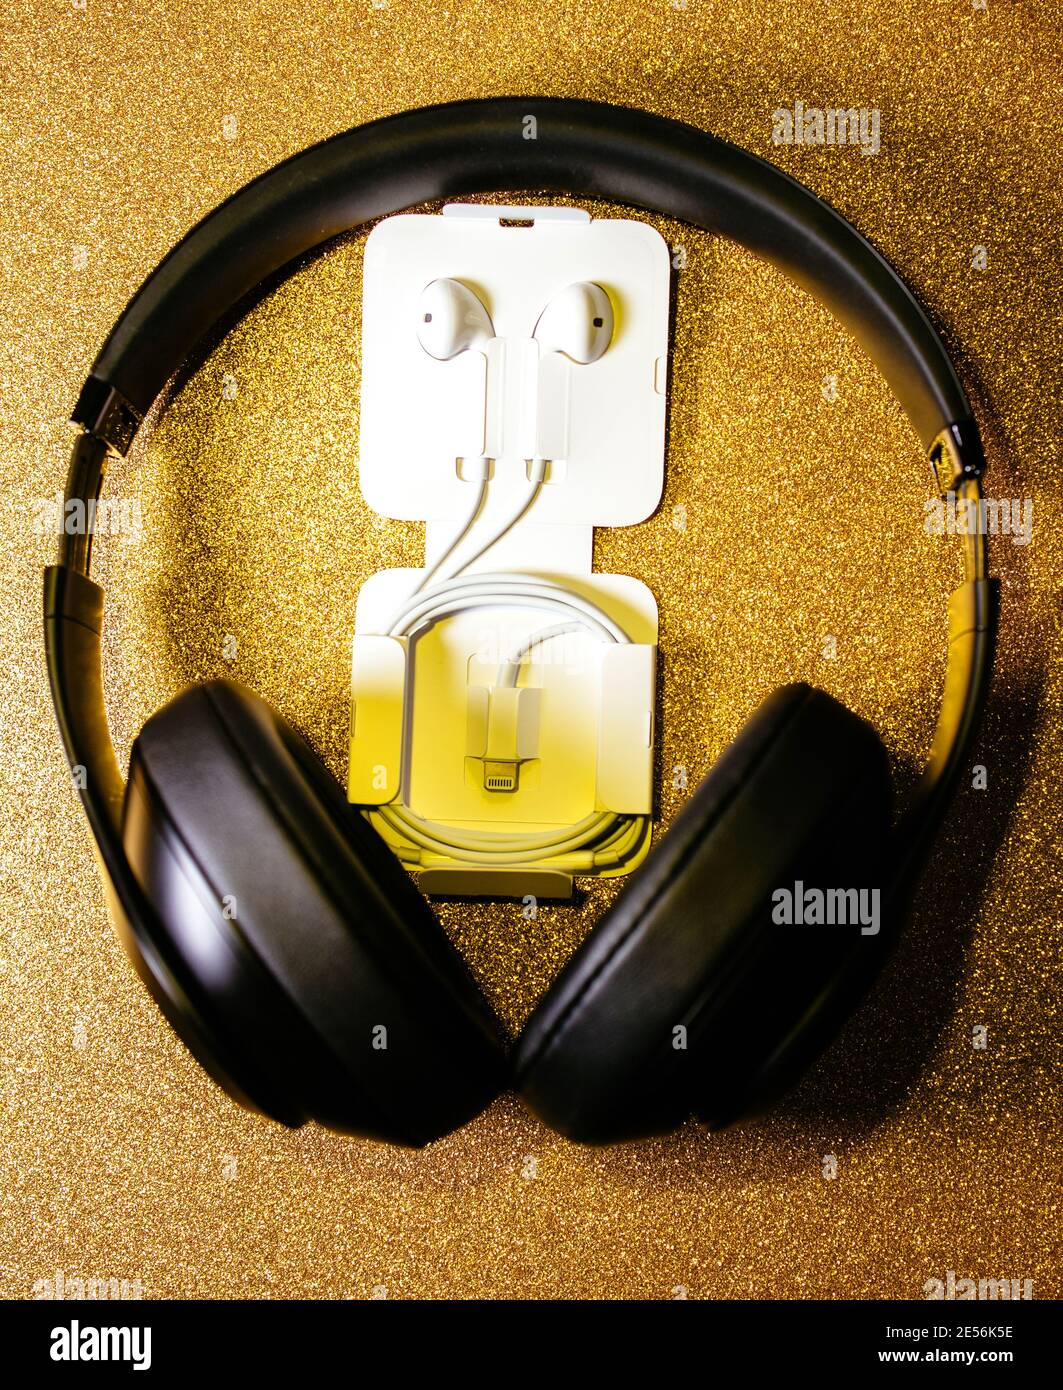 Paris, France - Oct 2, 2018: Apple Computers EarPods headphones with lightning connector on the golden sparkling background with large Beats By Dr Dre black headphones Stock Photo